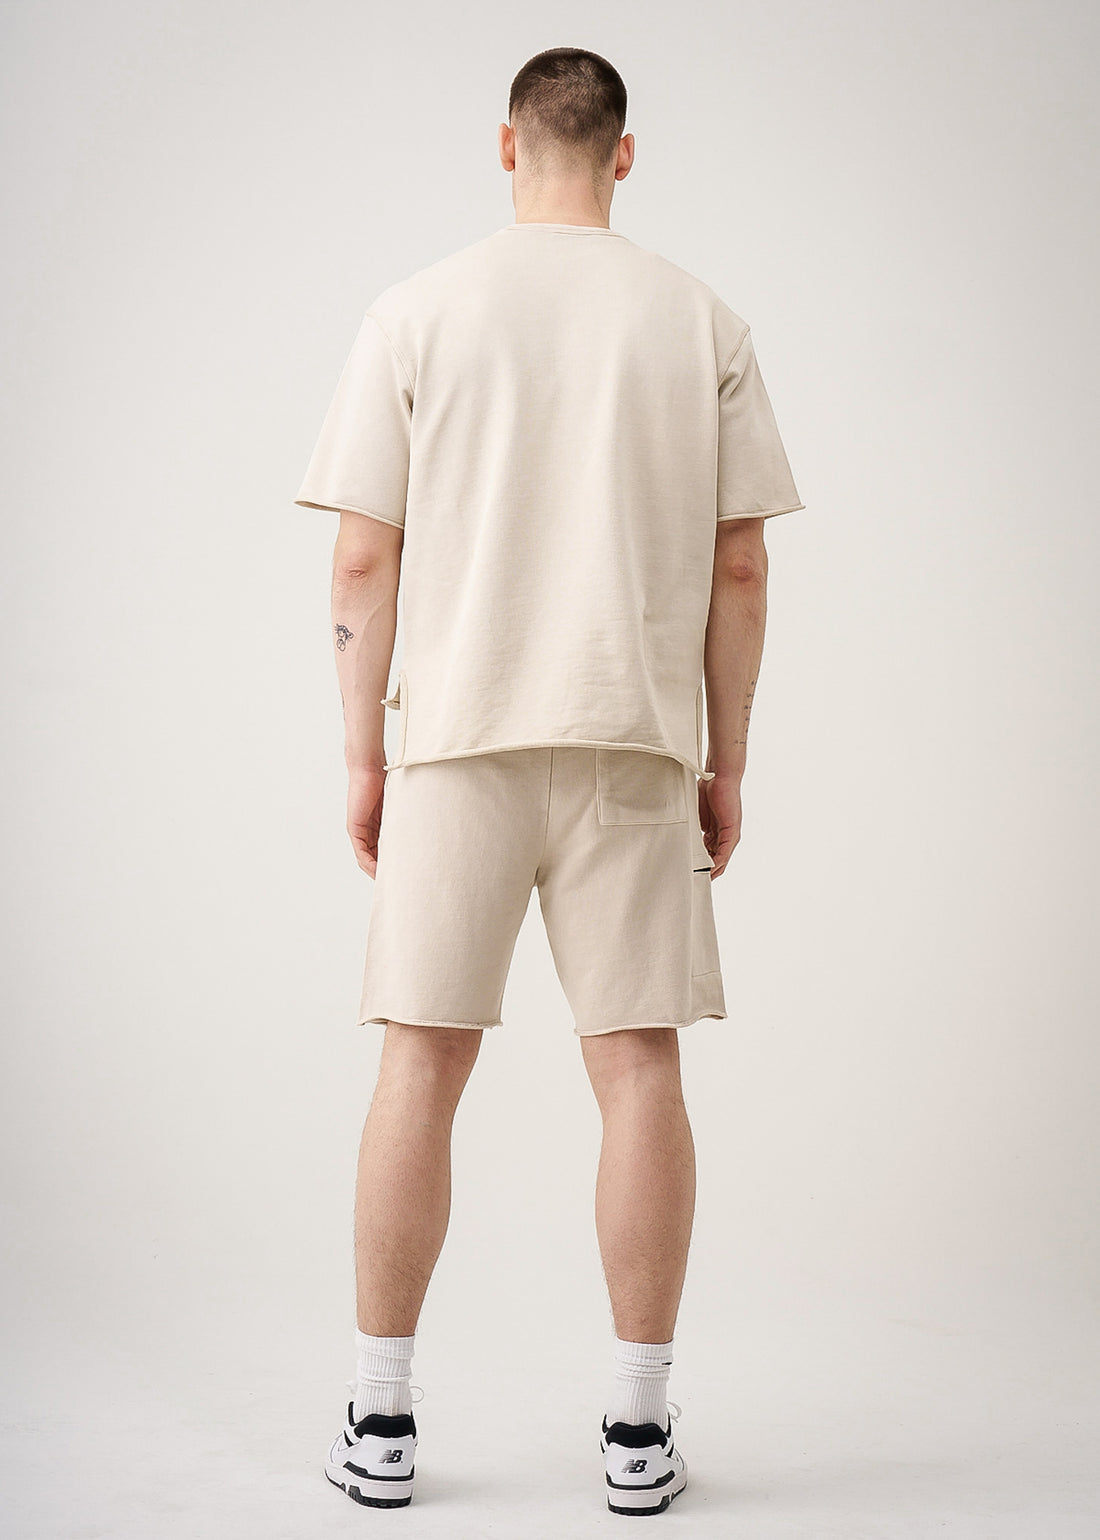 315 GSM French Terry Garment Dye Cropped Short Set